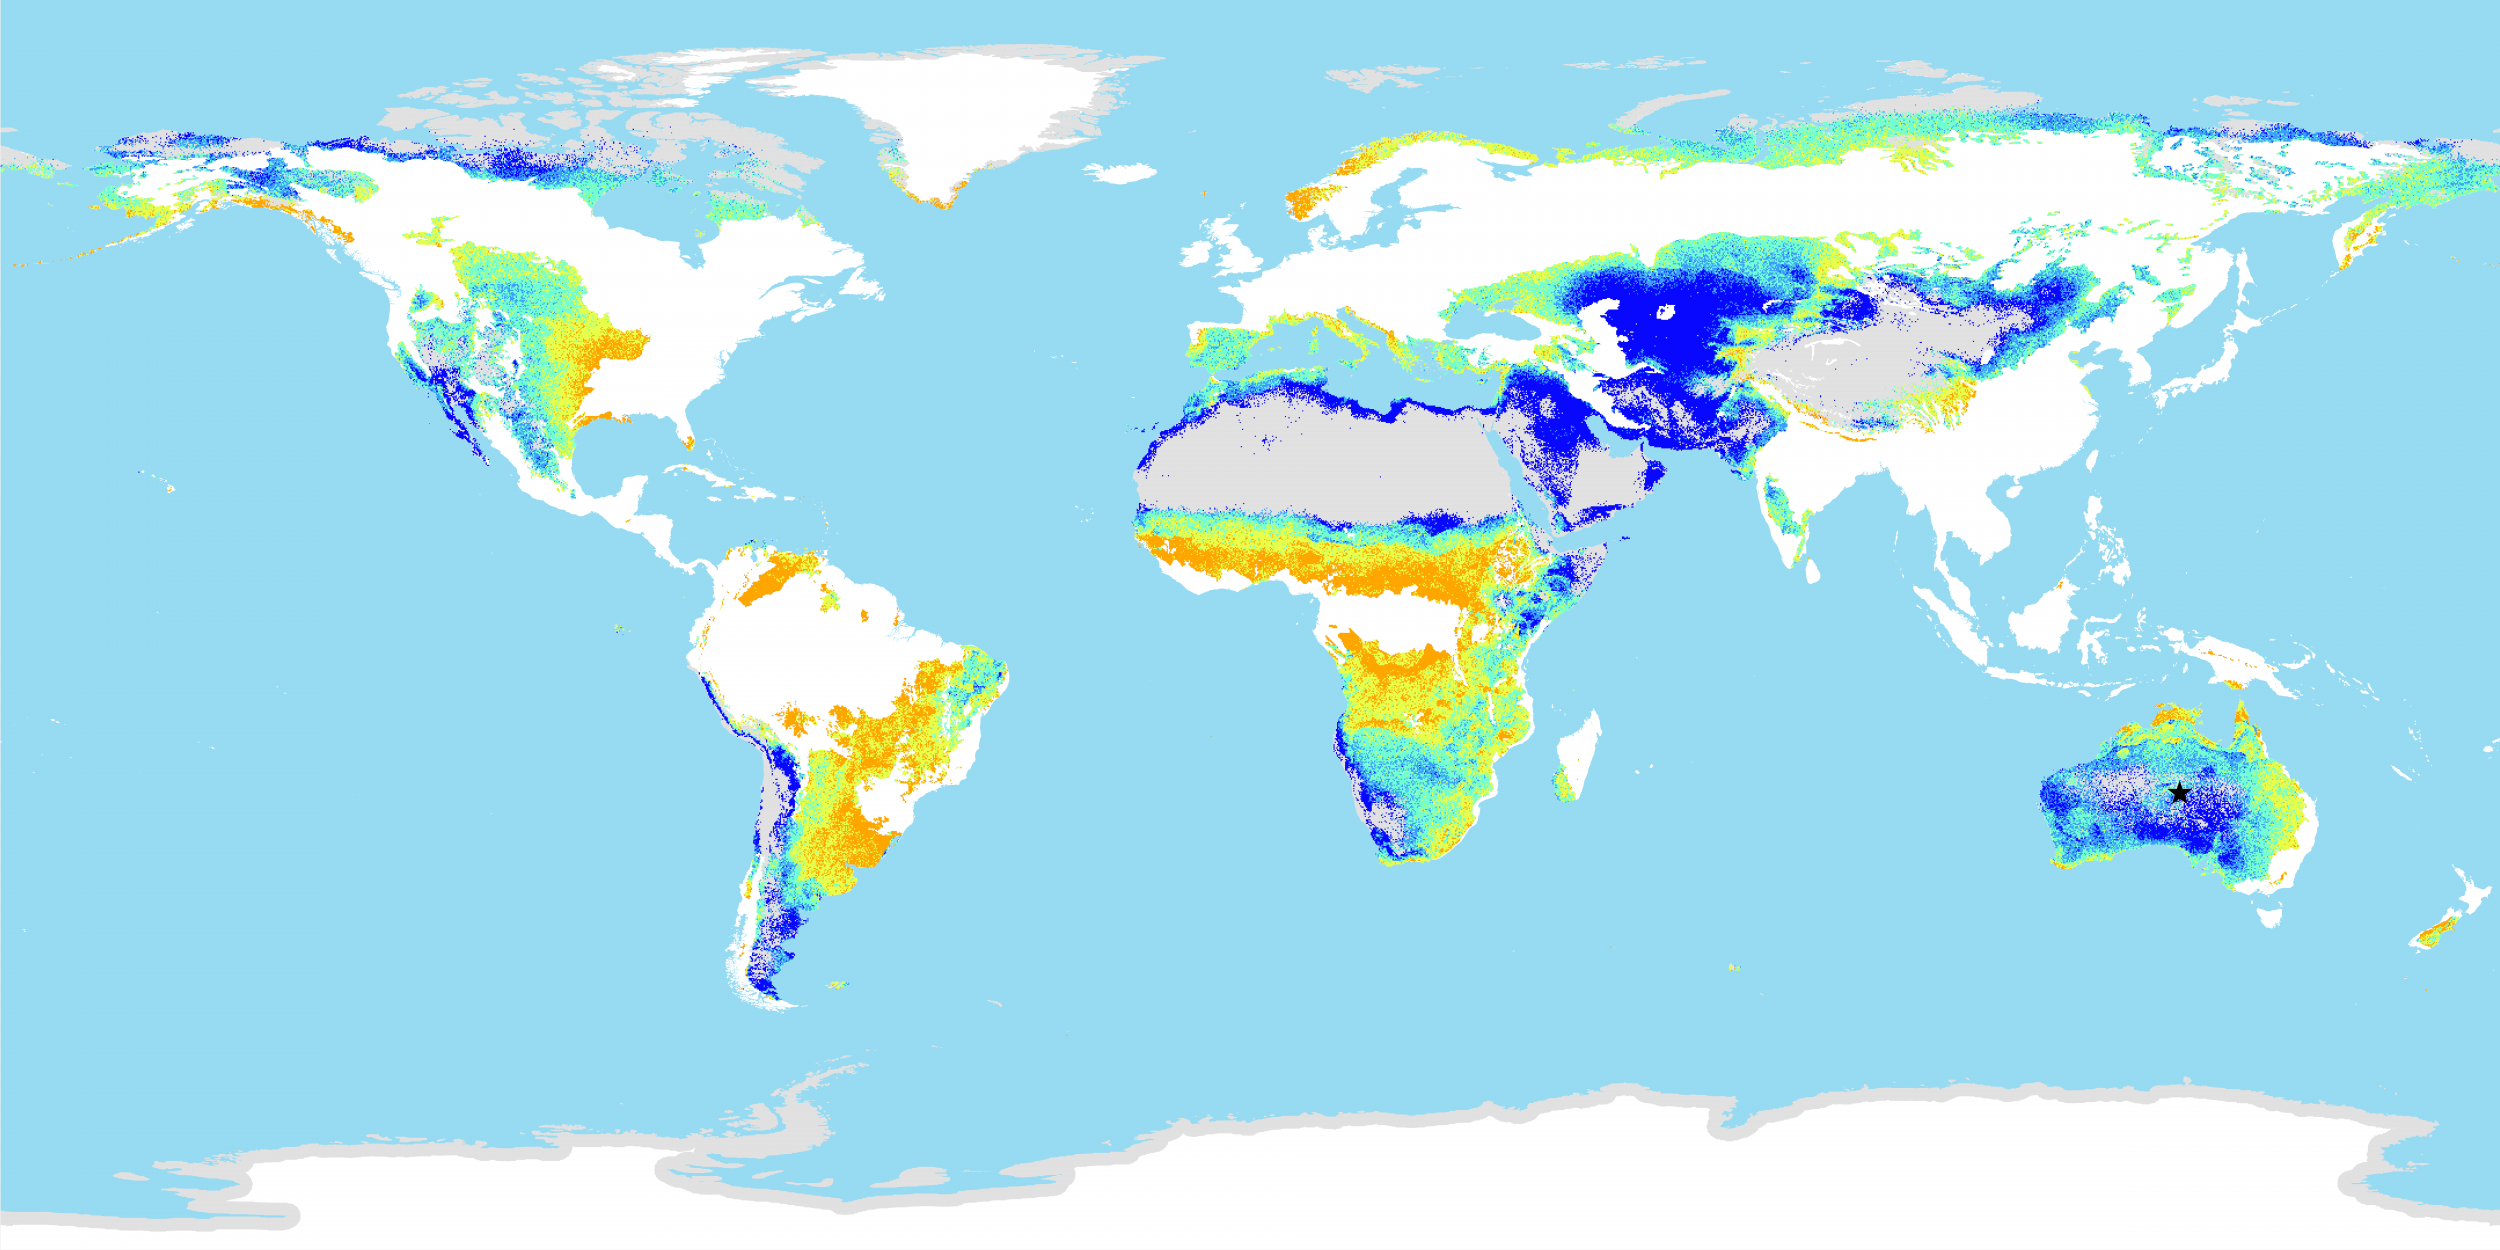 Coefficient of variation of annual rainfall by 2050 in rangelands